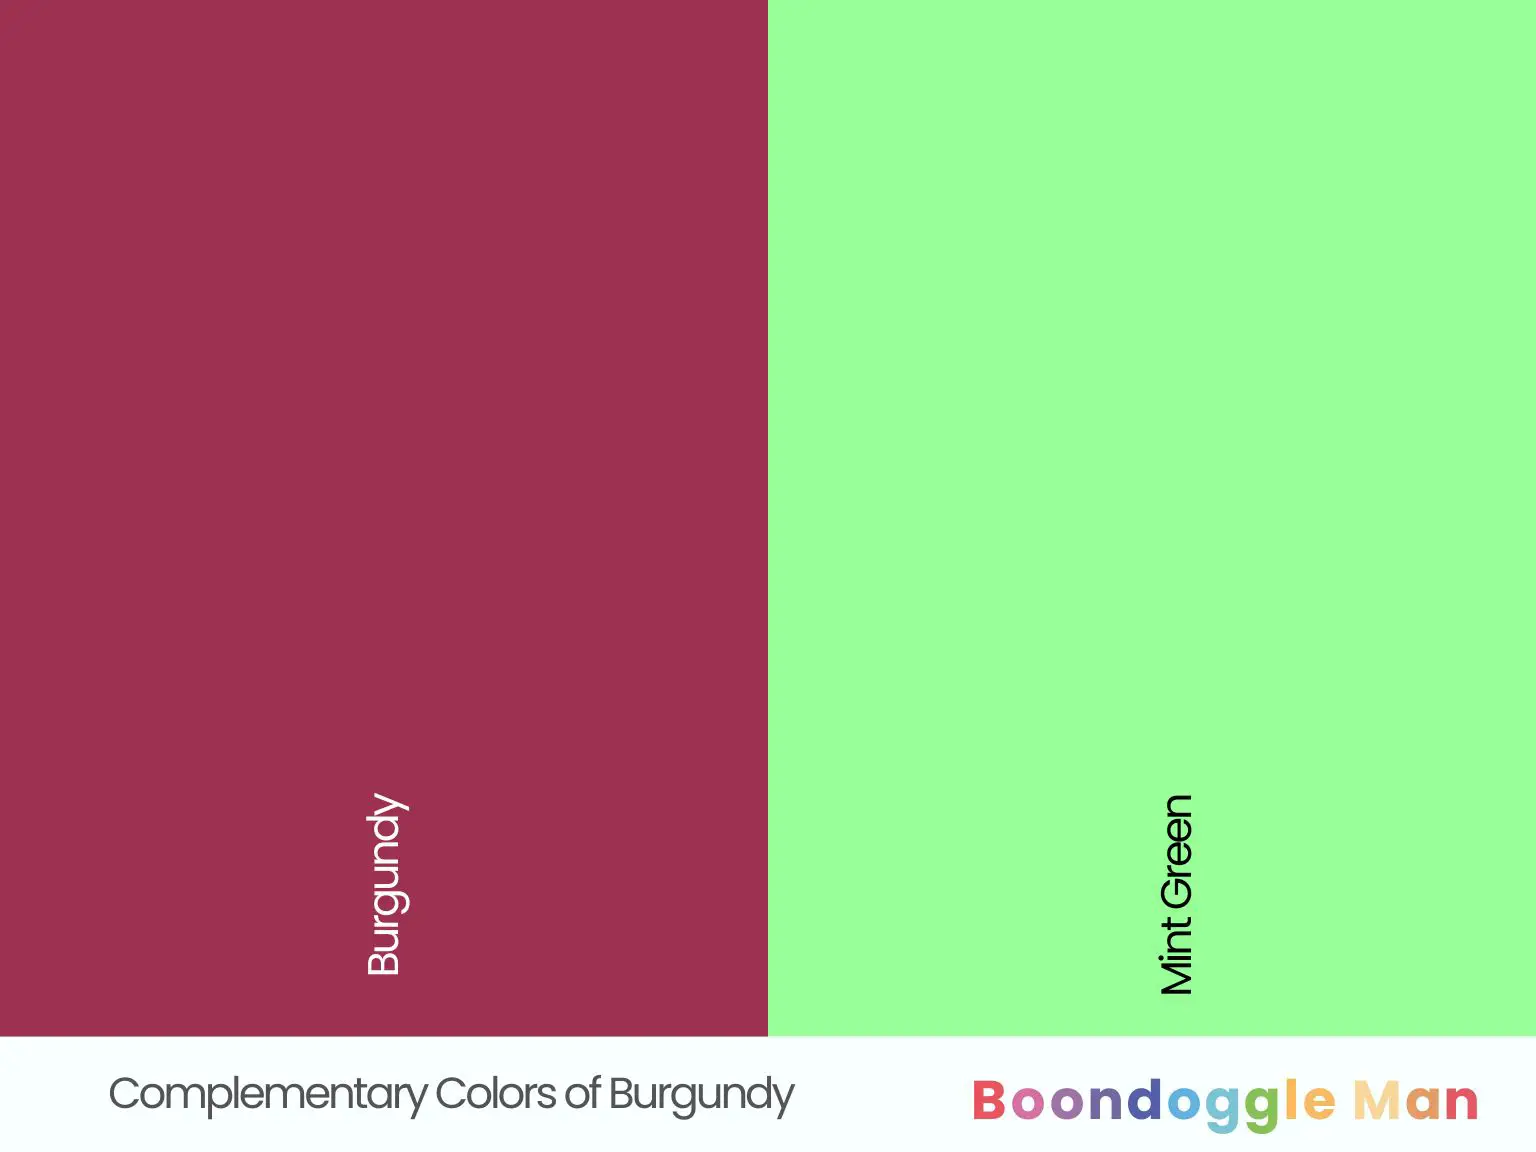 Complementary Colors of Burgundy